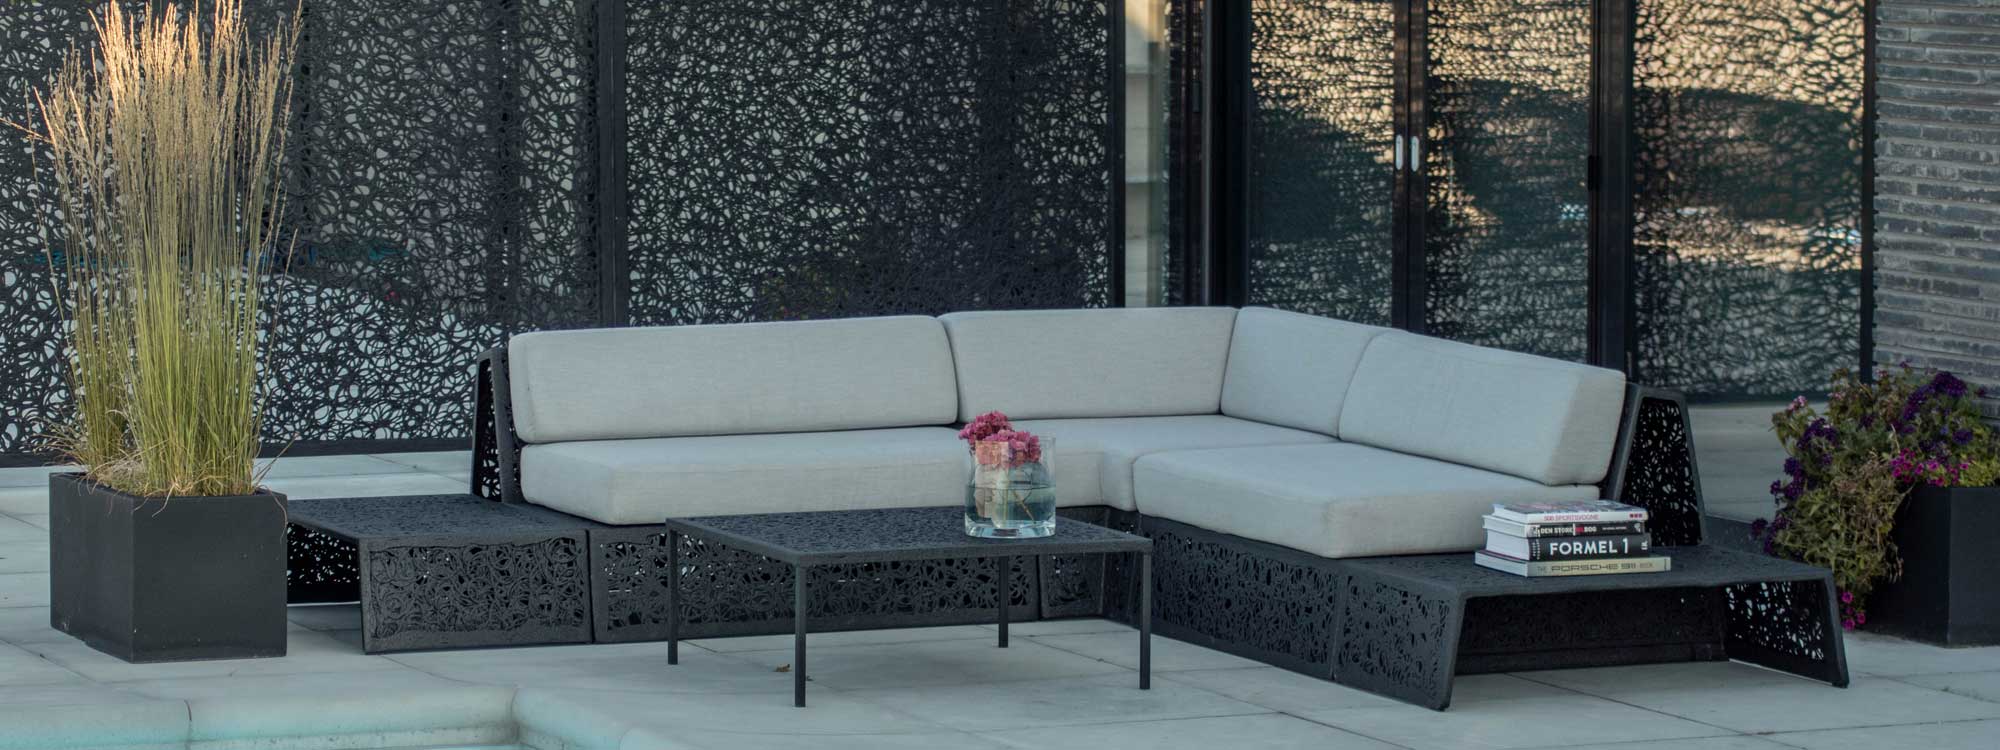 Image of Bios Lounge garden corner sofa in black, surrounded by lava fence panels by Unknown Nordic